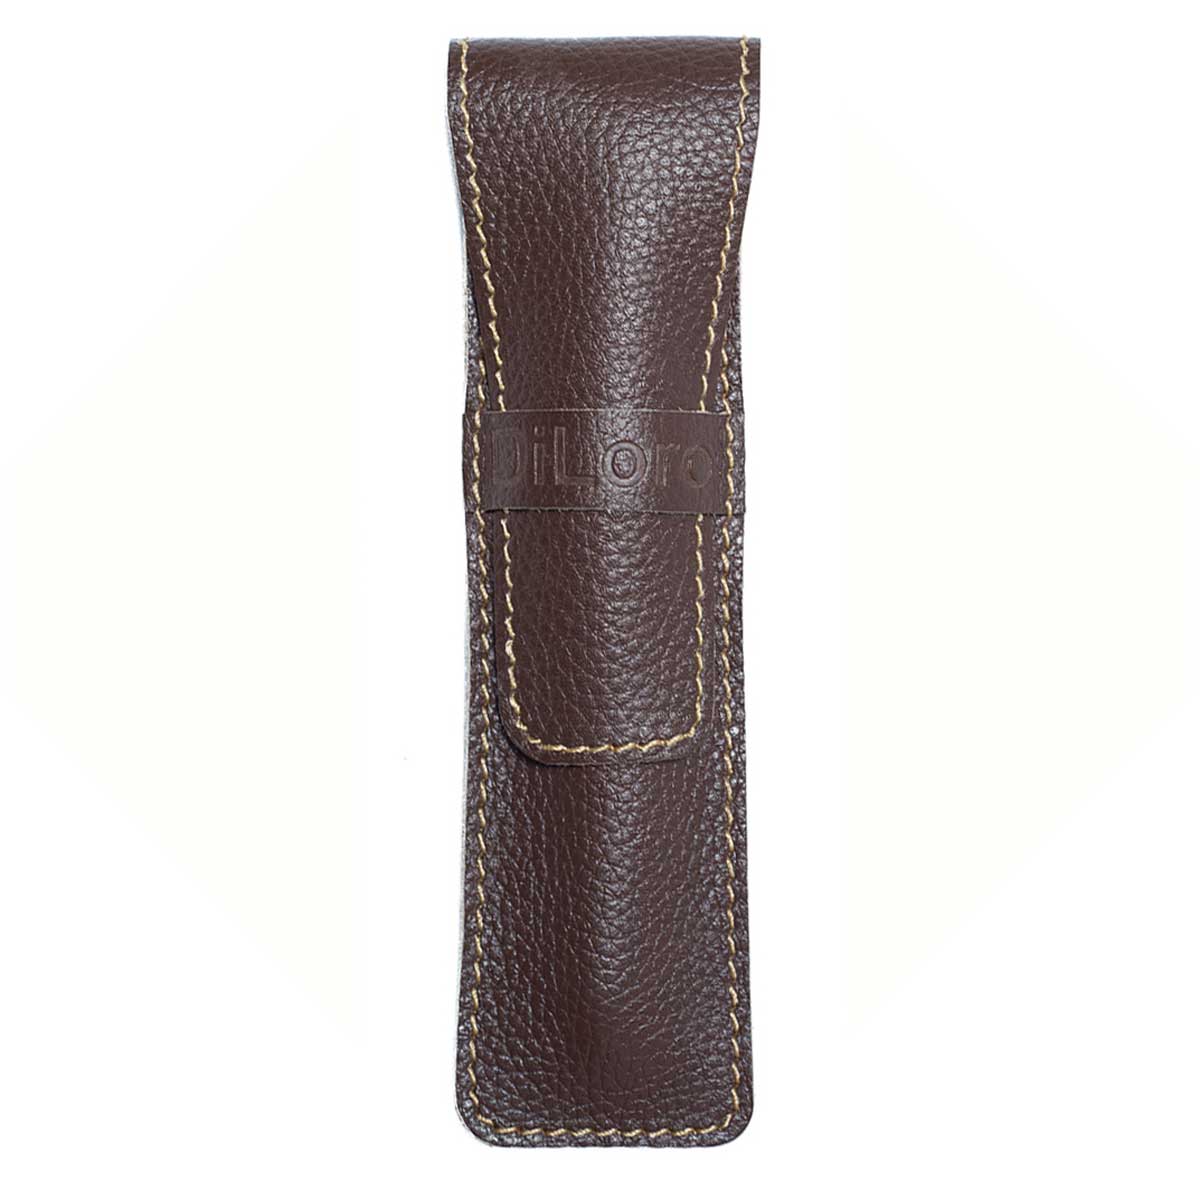 DiLoro Single Leather Pen Holder in Chocolate Brown Full Grain Leather